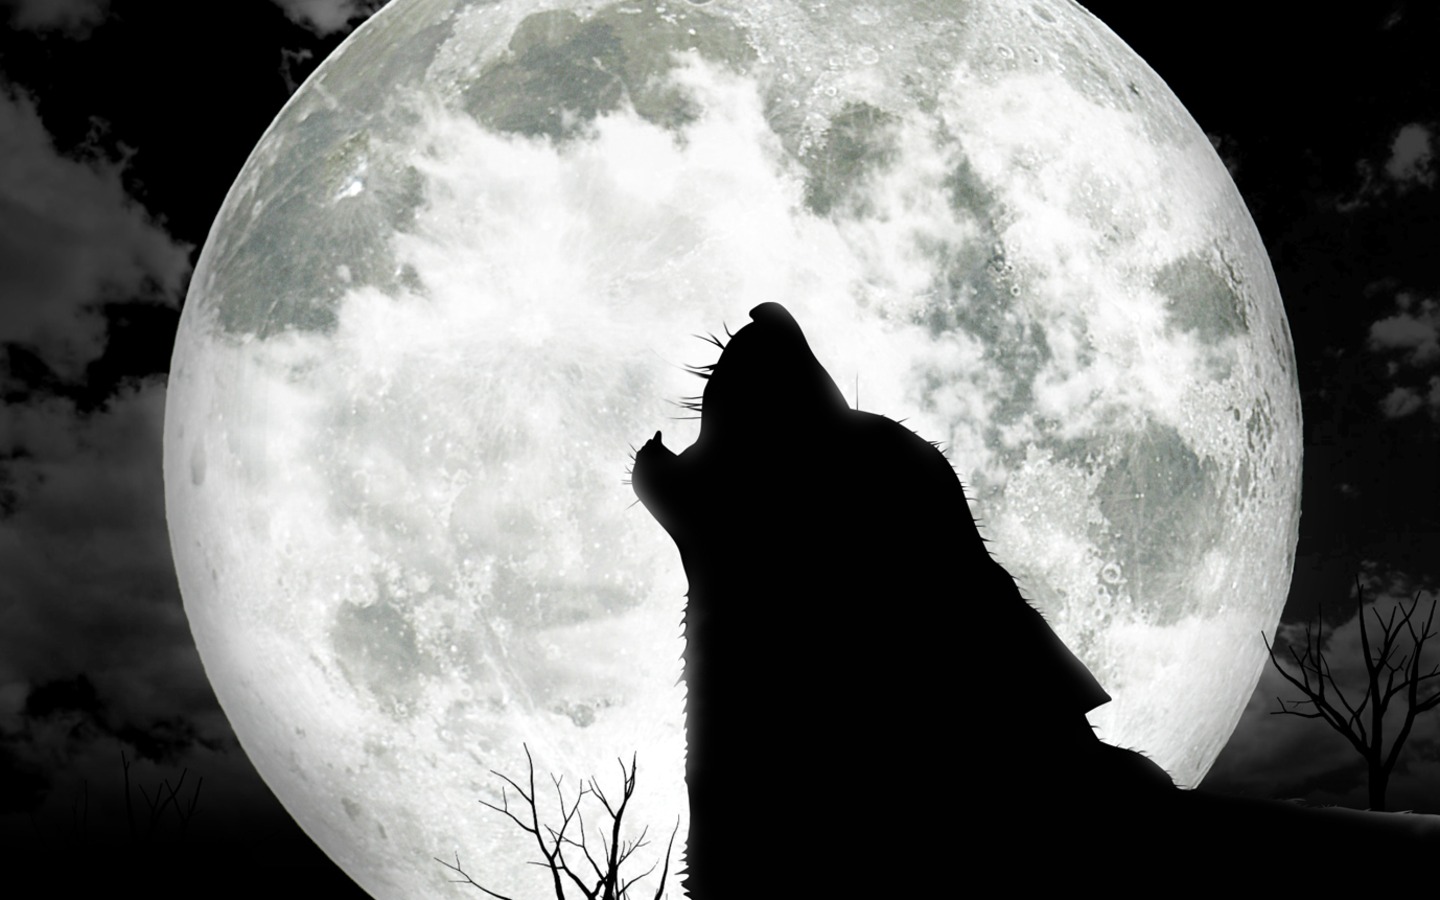 Wolf Wallpaper Black And White Image Pictures Becuo